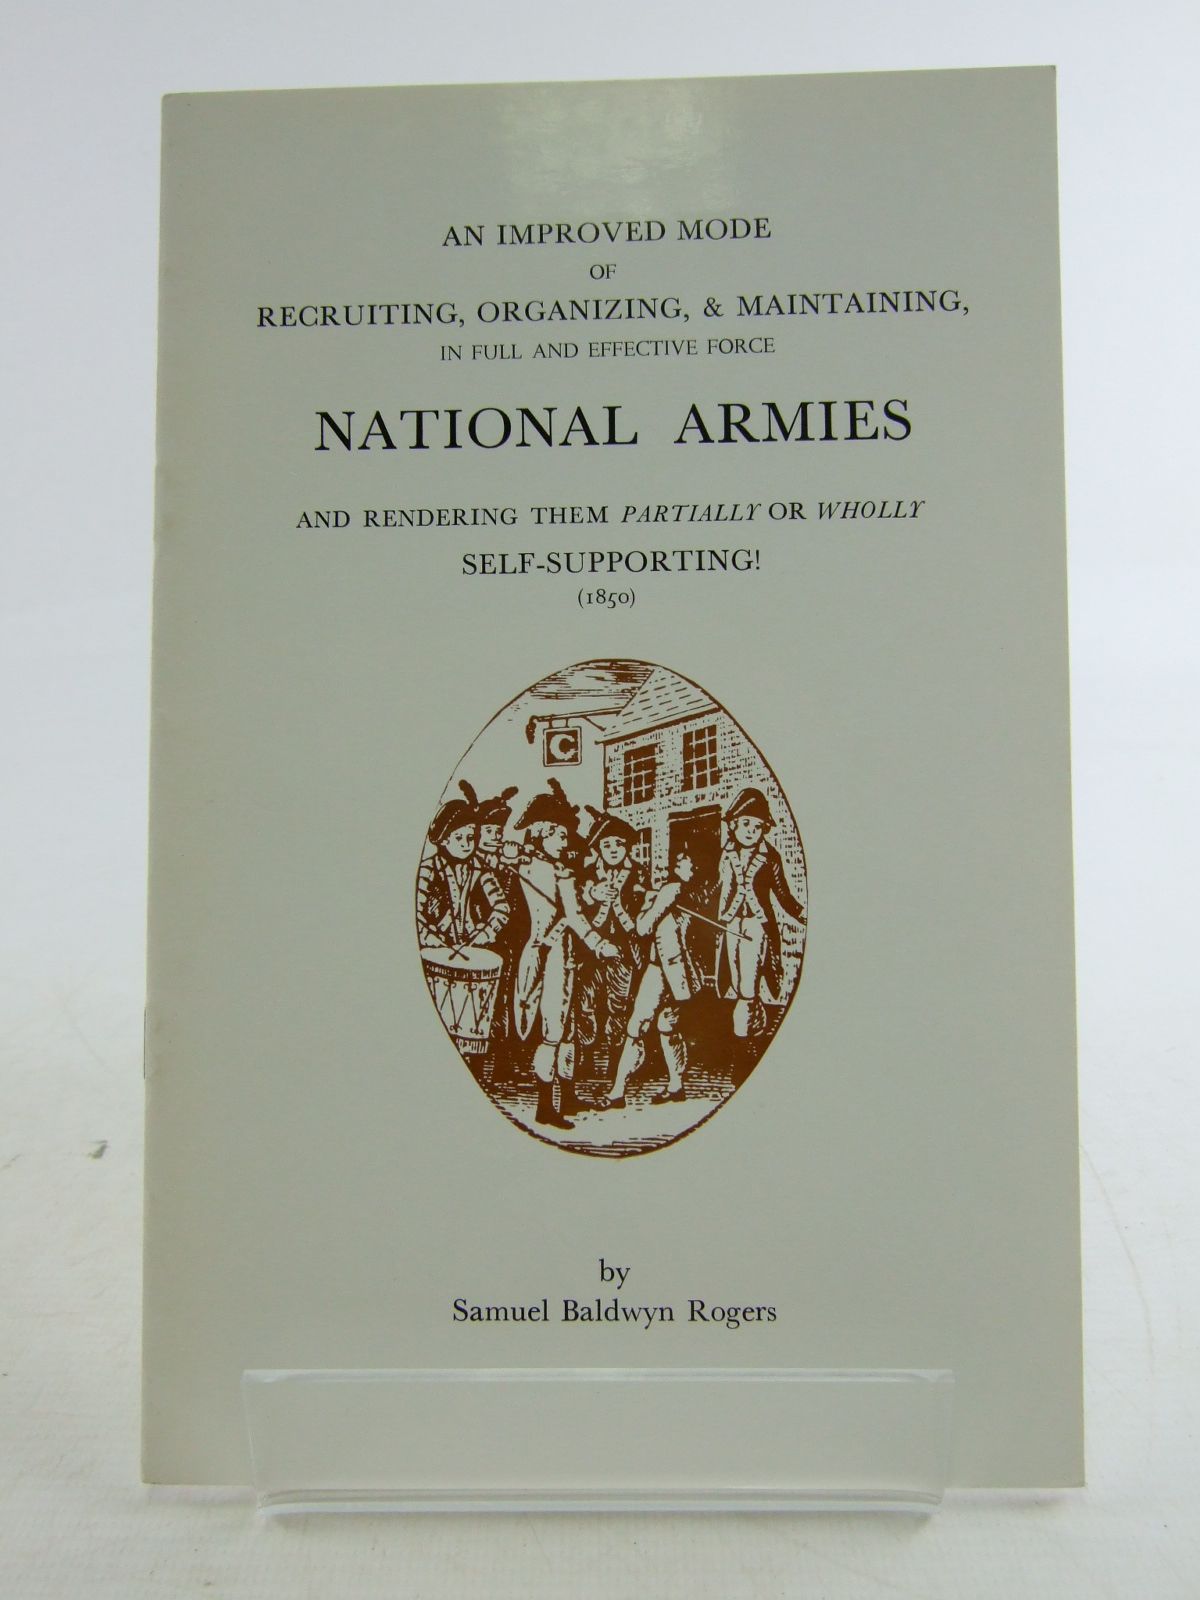 Photo of AN IMPROVED MODE OF RECRUITING, ORGANISING, & MAINTAINING, NATIONAL ARMIES written by Rogers, Samuel Baldwyn published by Moss Rose Press (STOCK CODE: 1806865)  for sale by Stella & Rose's Books